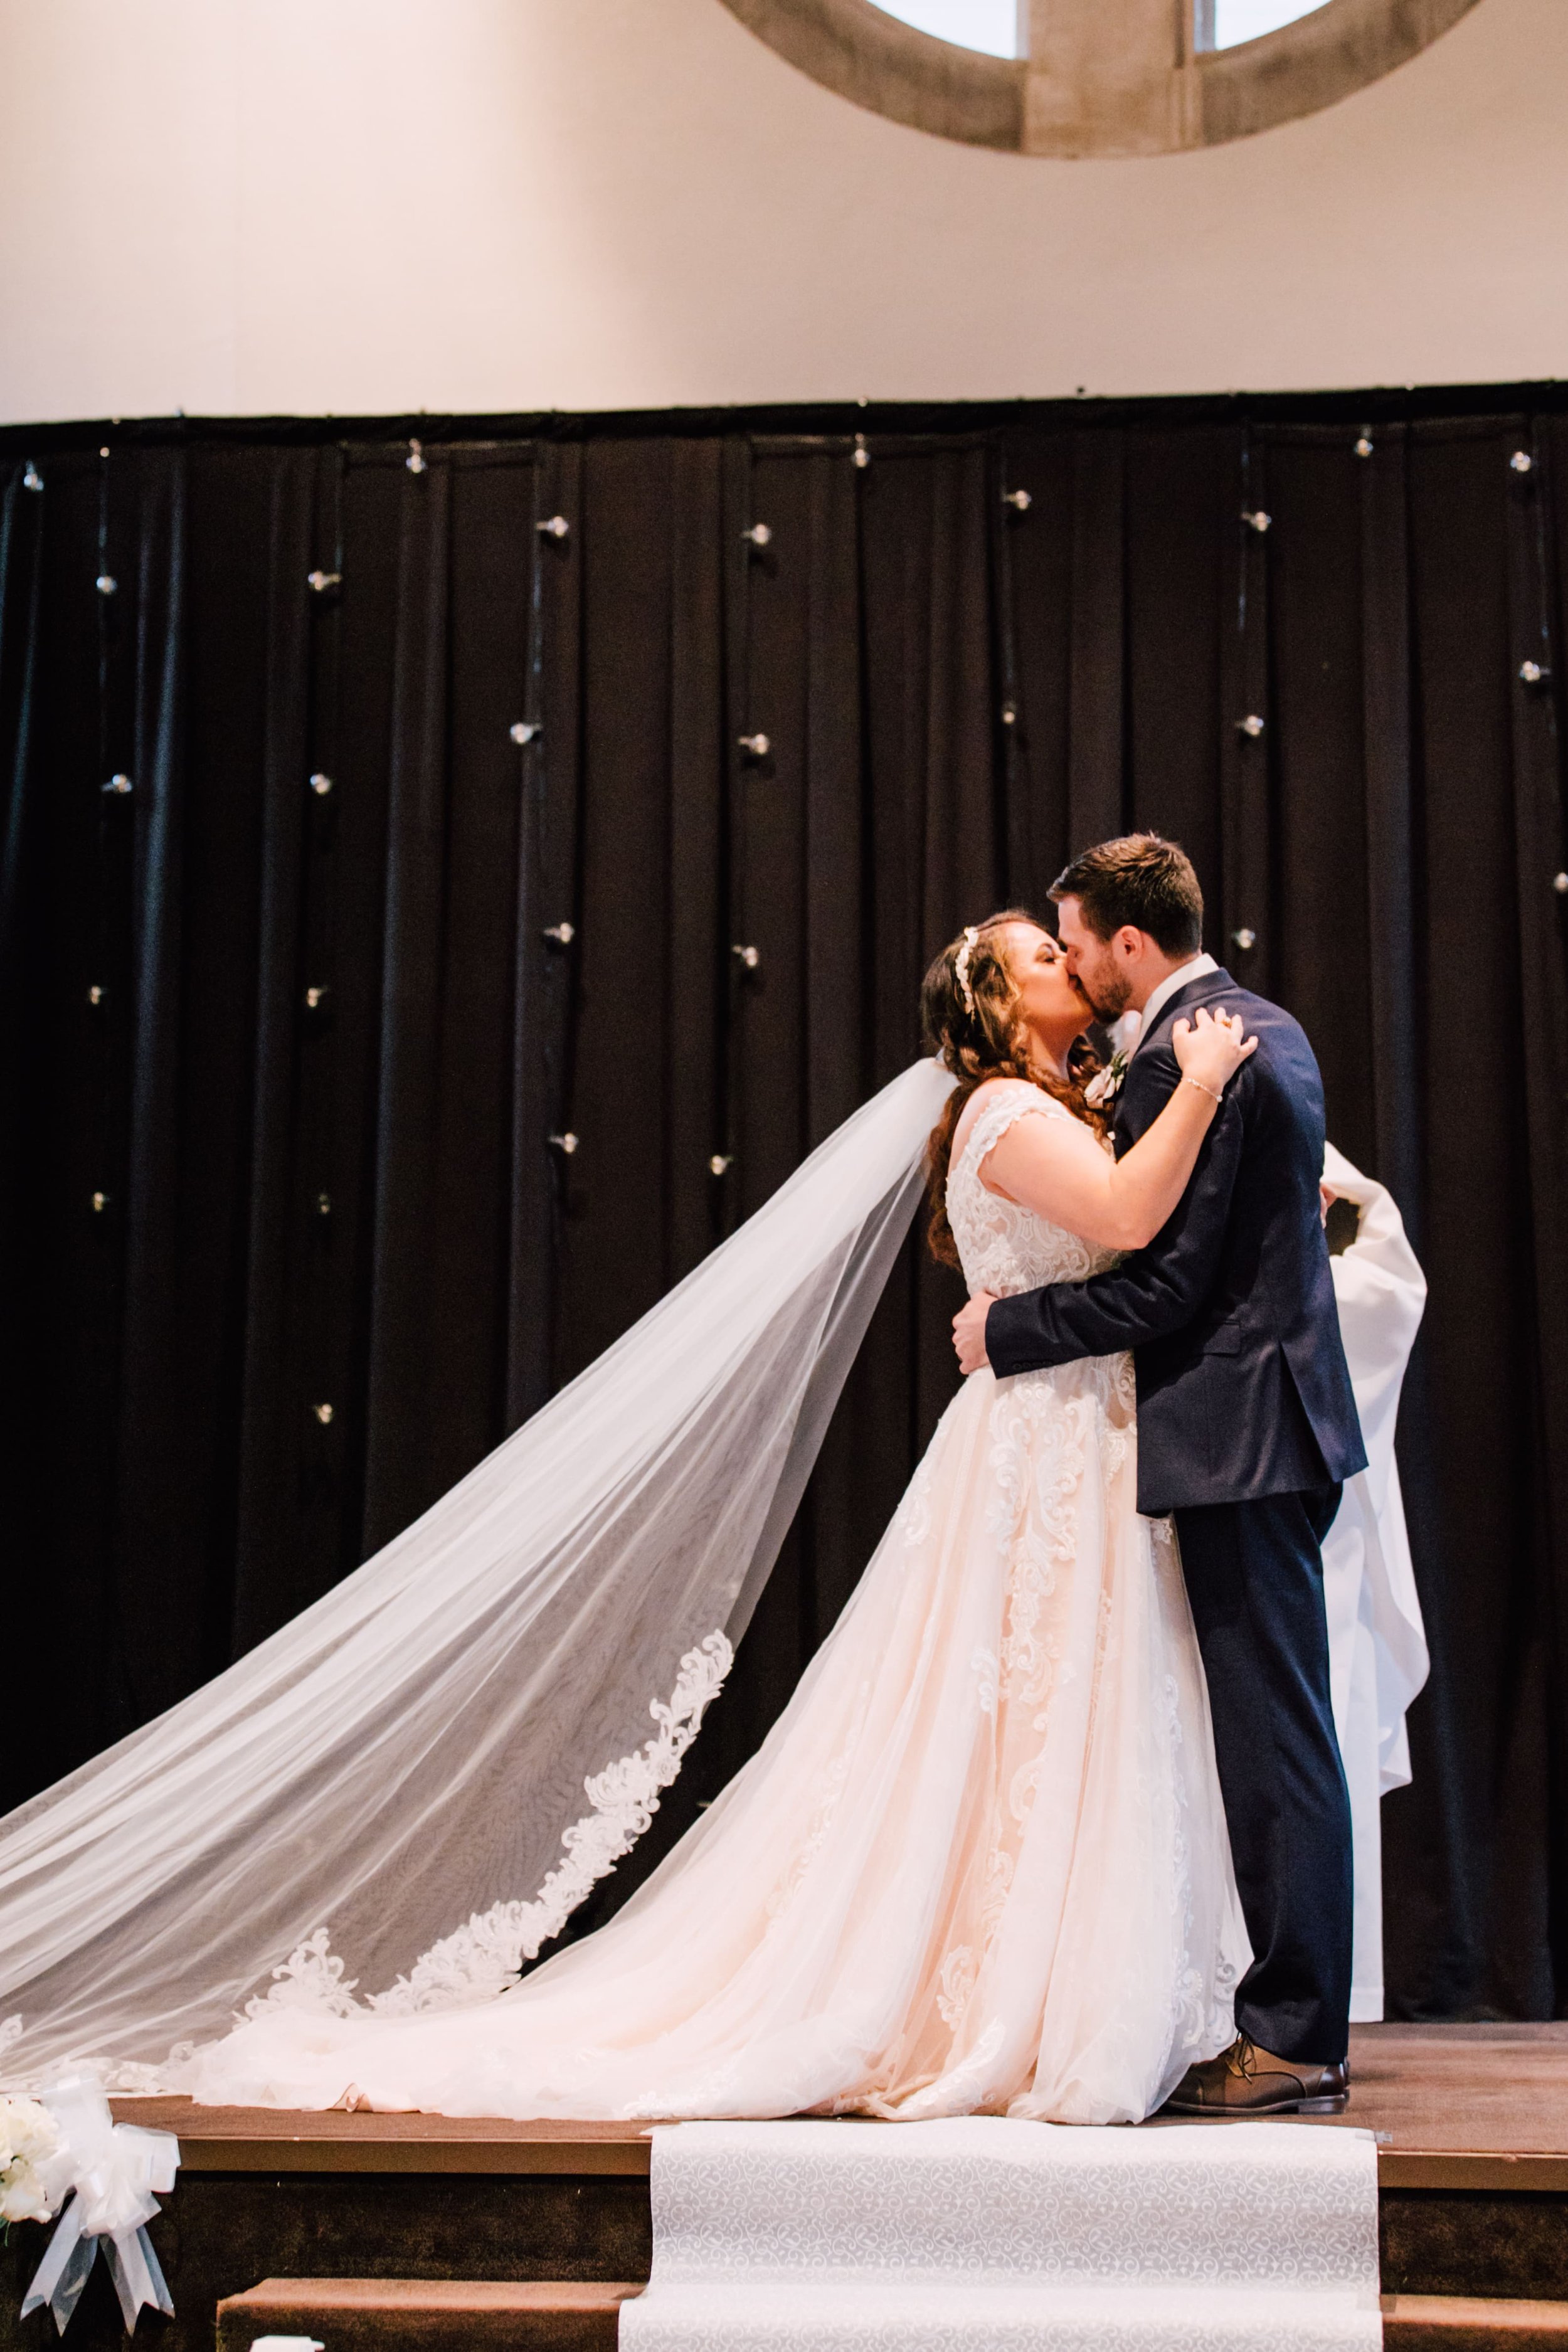  the bride and groom share their first kiss as husband and wife at their fall wedding ceremony 